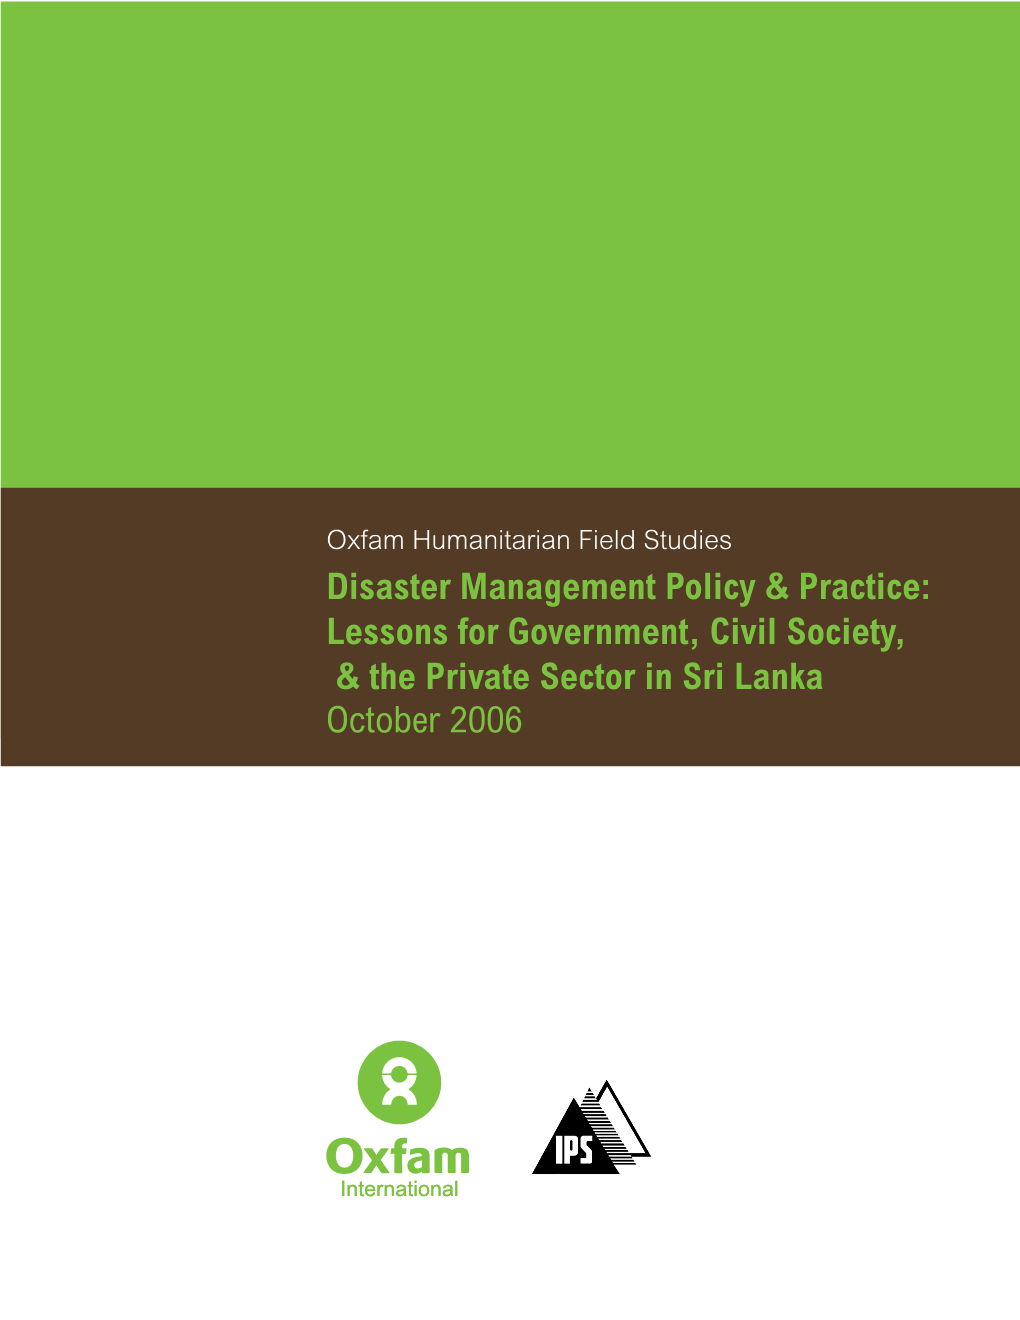 Disaster Management Policy & Practice: Lessons for Government, Civil Society, & the Private Sector in Sri Lanka October